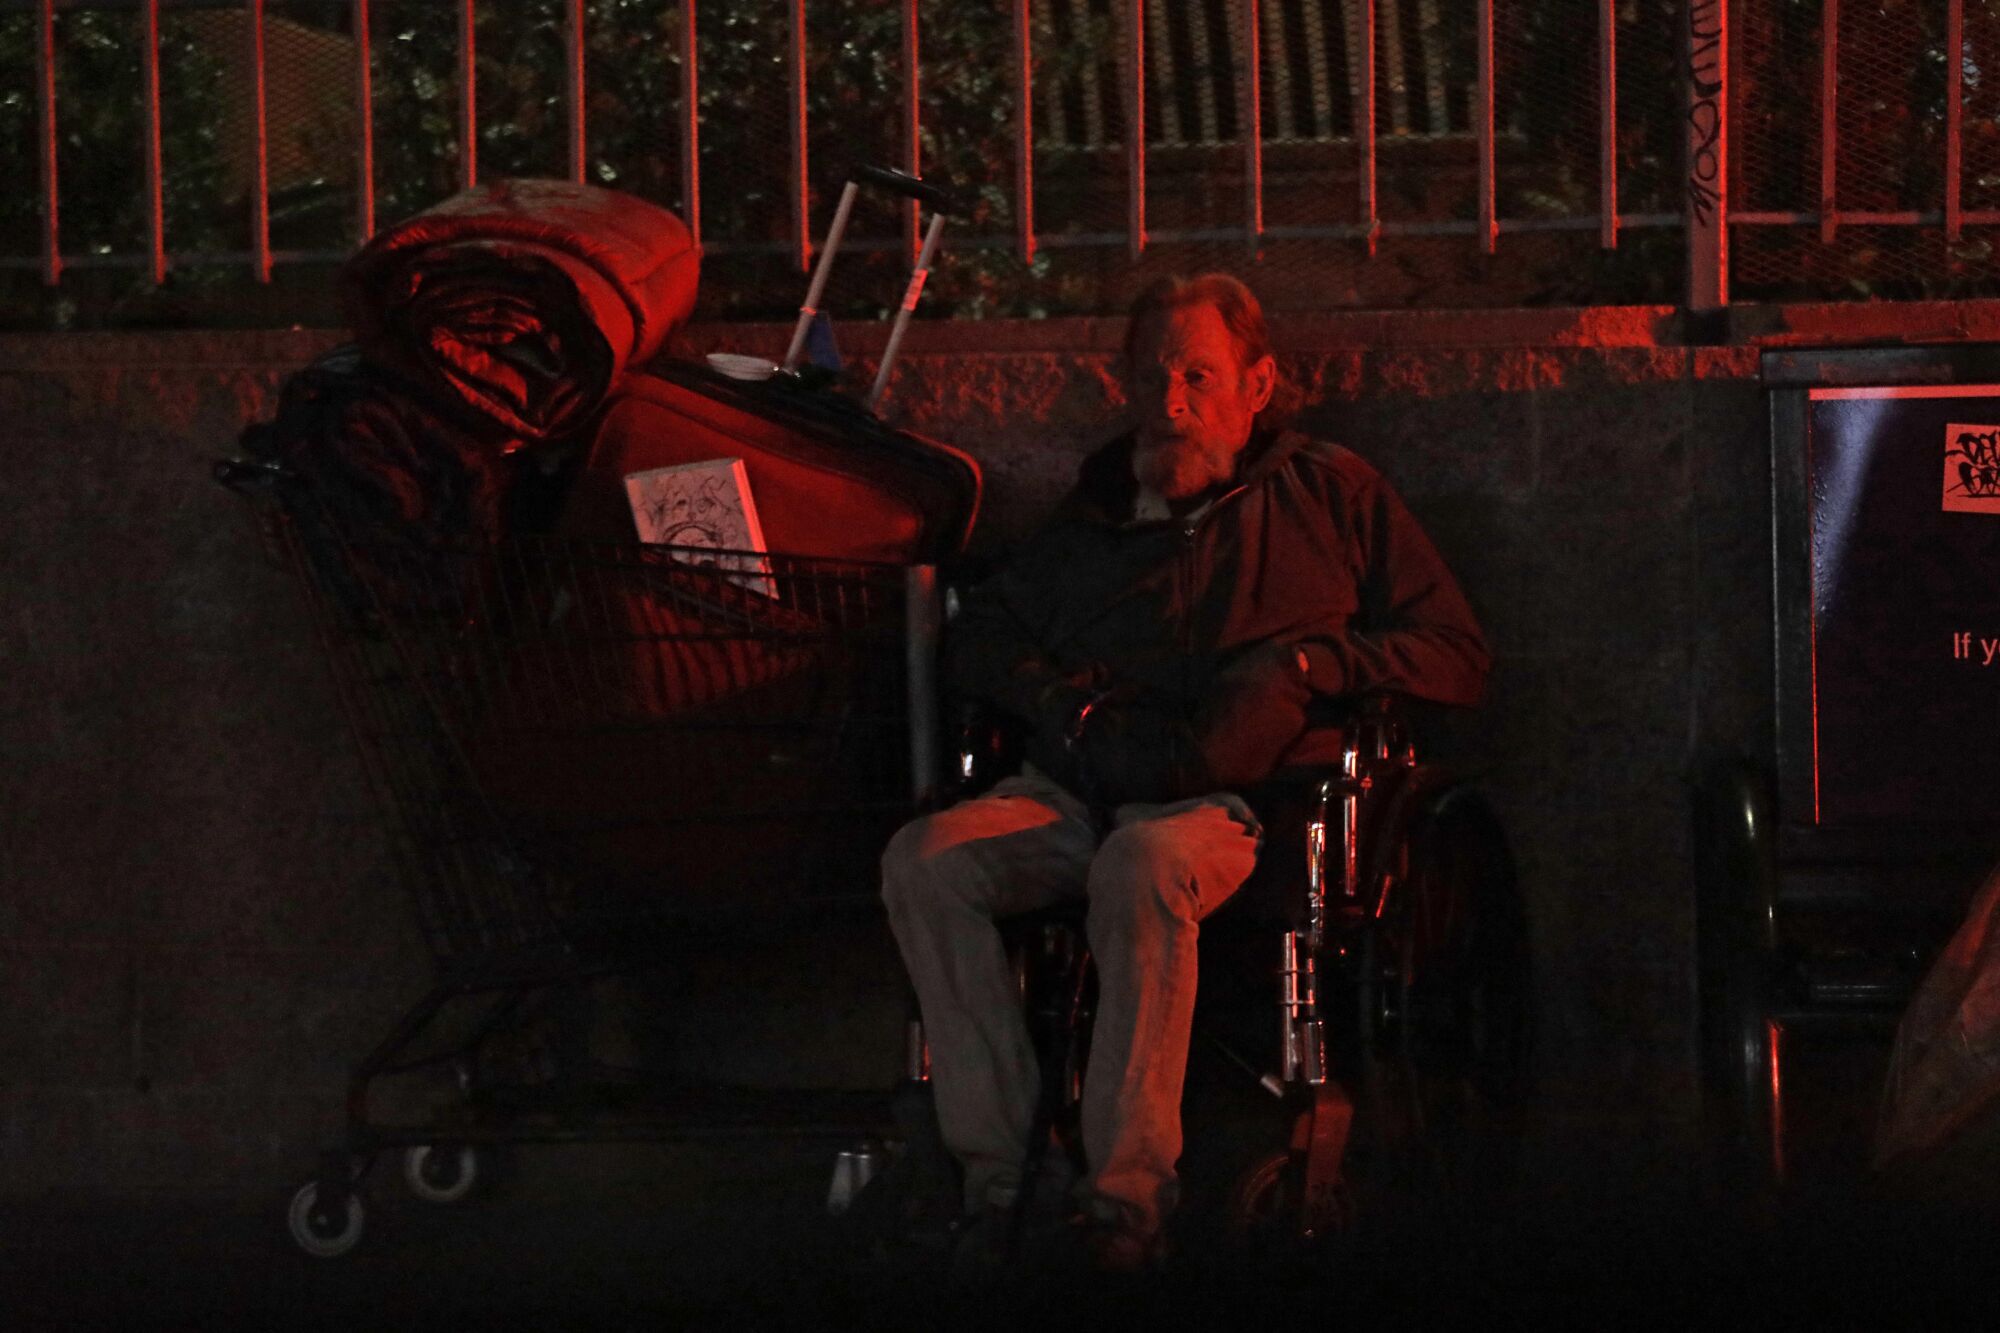 An elderly homeless man sits in his wheelchair next to his belongings on the sidewalk at night.